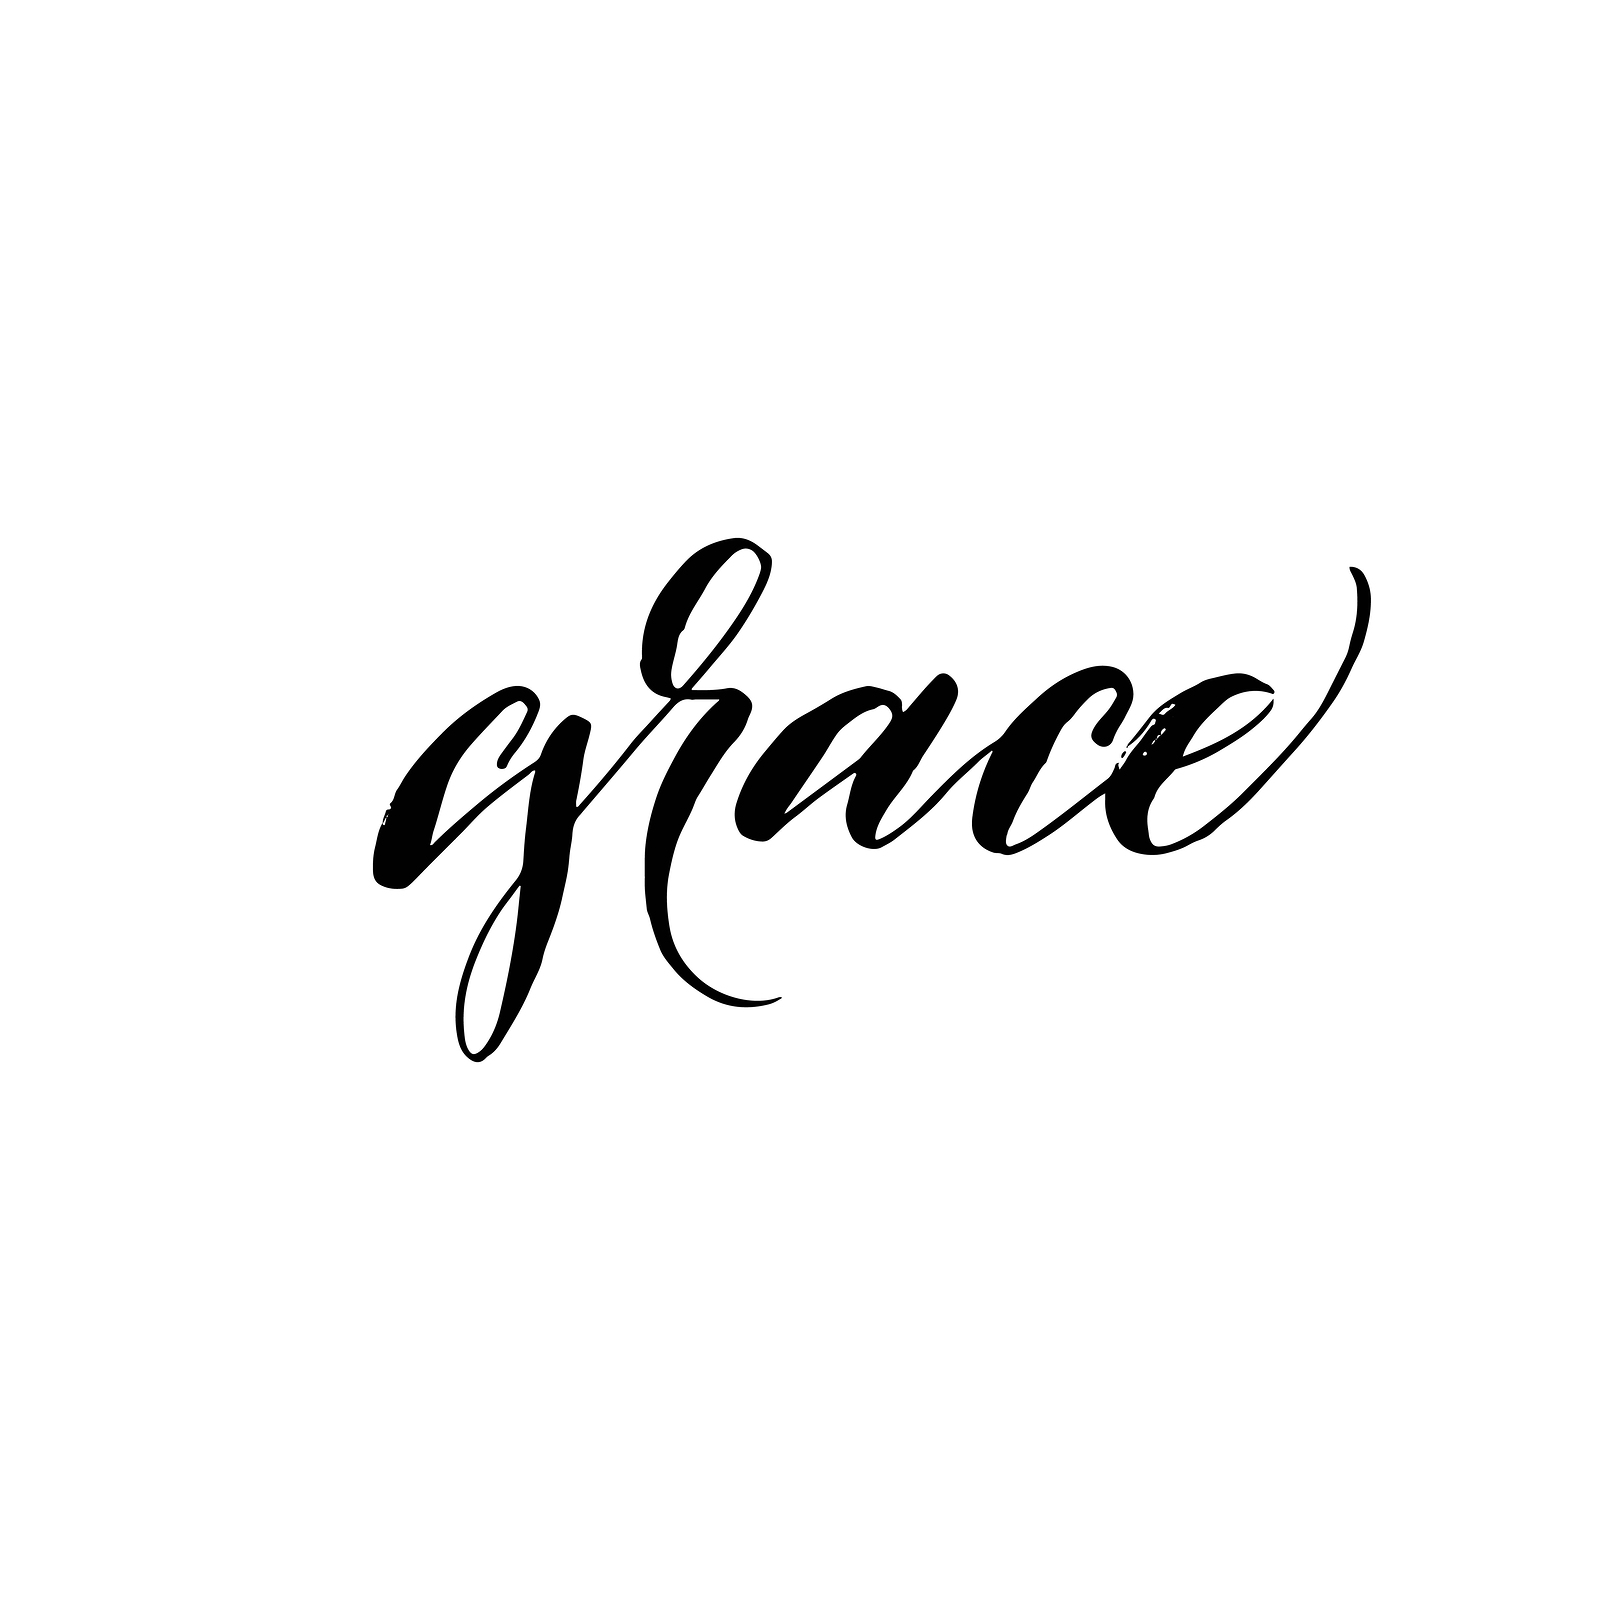 Offer Yourself Grace